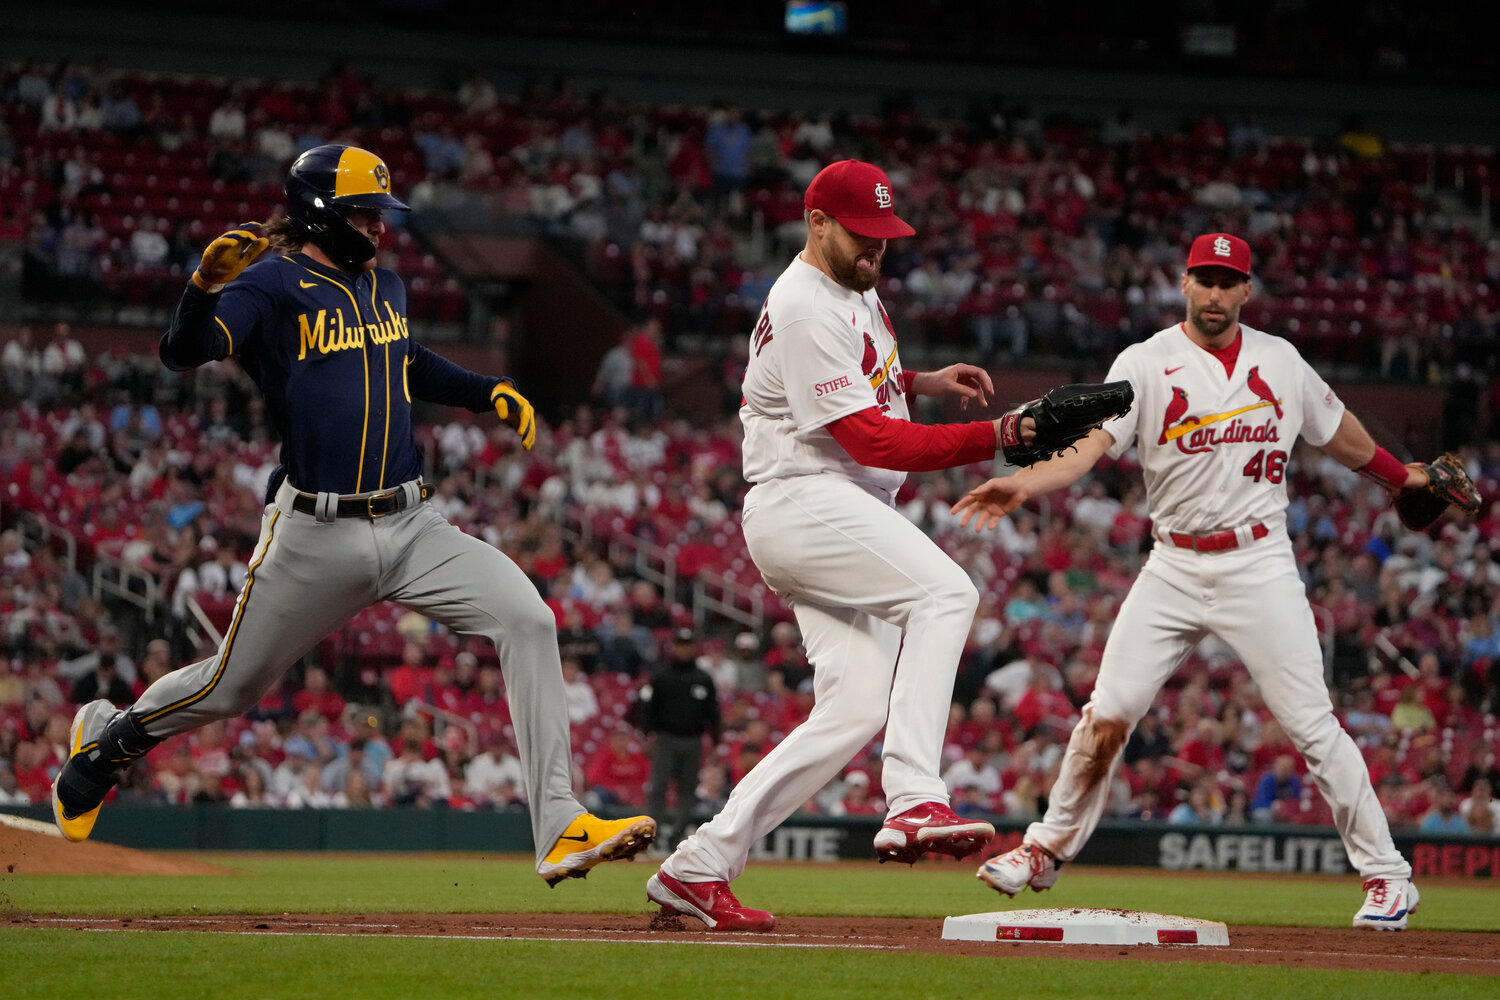 Milwaukee Brewers' Brice Turang (left) is out at first by St. Louis Cardinals starting pitcher Jordan Montgomery as first baseman Paul Goldschmidt watches during their game Tuesday night in St. Louis. (AP Photo/Jeff Roberson)